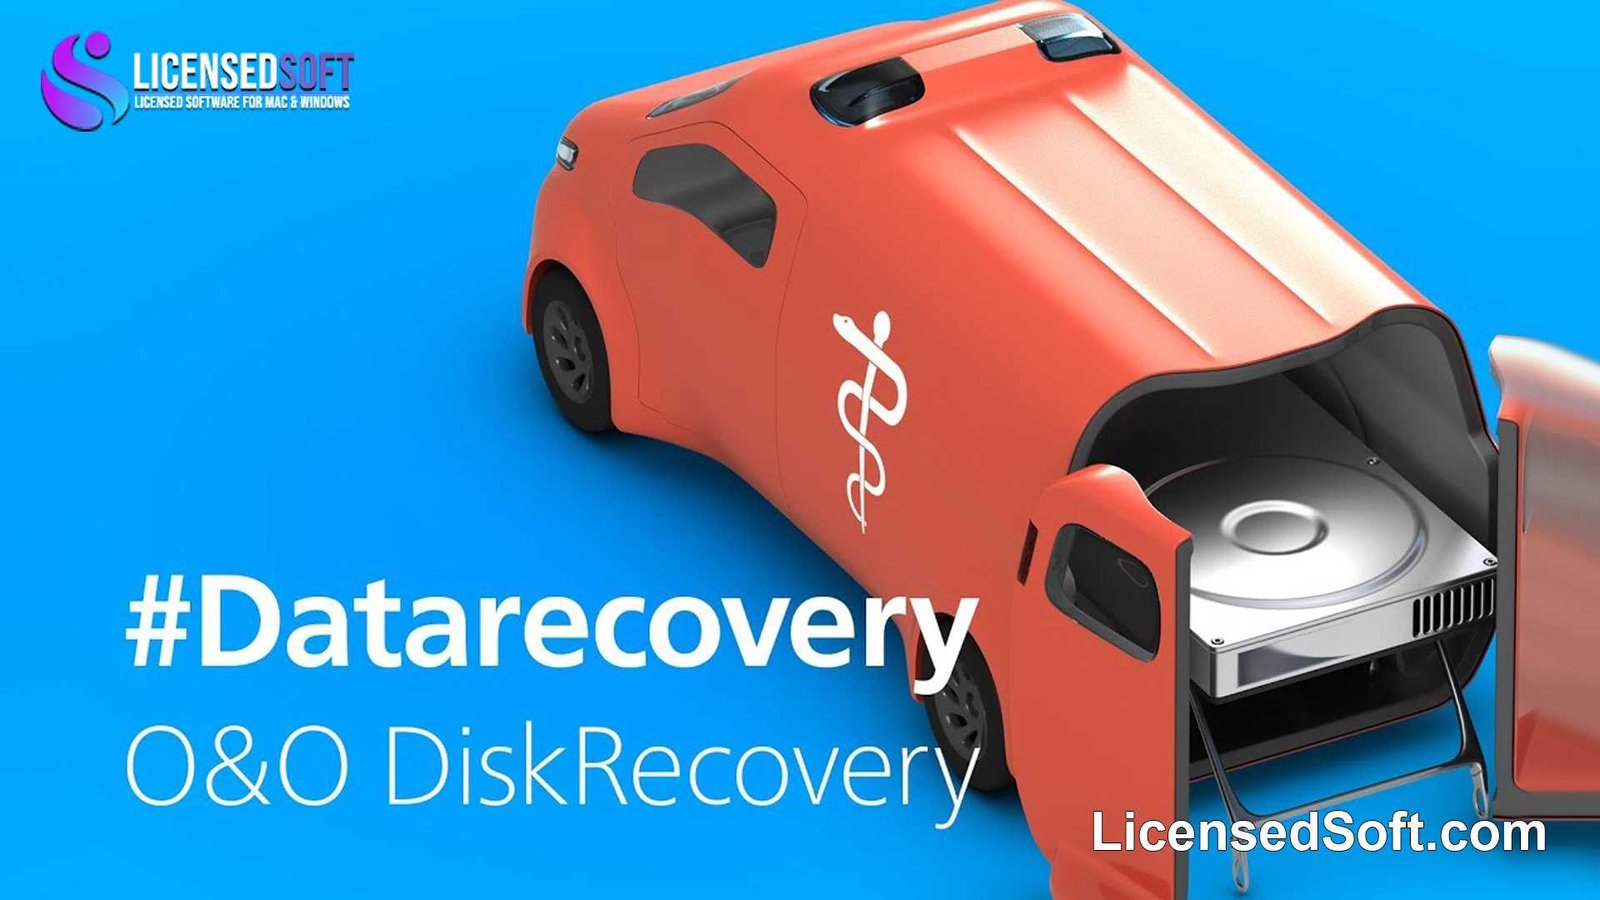 O&O DiskRecovery 14 Professional Perpetual License By LicensedSoft